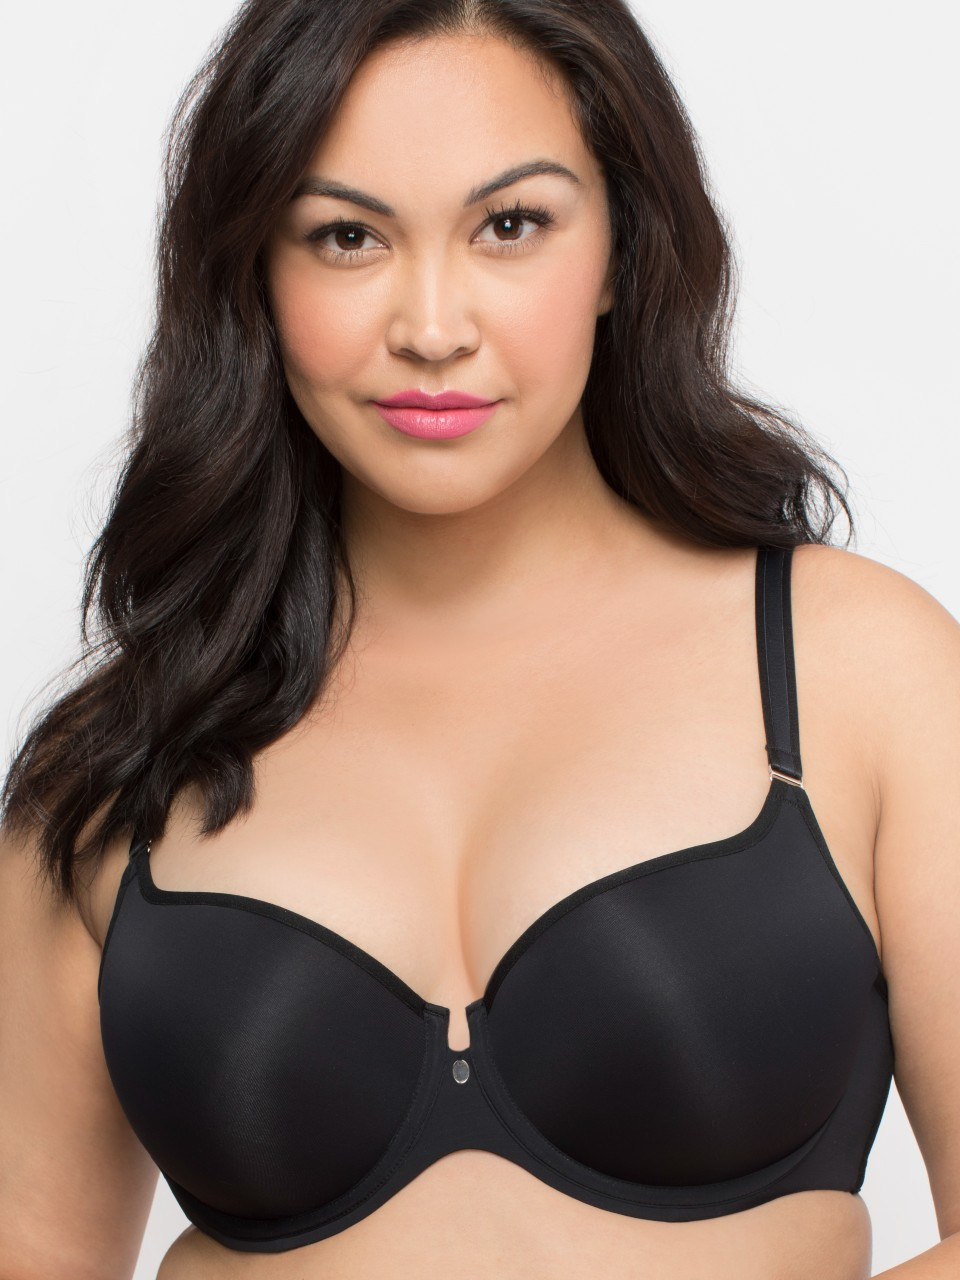 CURVY COUTURE Bombshell Nude Multi-Way Strapless Bra, US 38H, UK